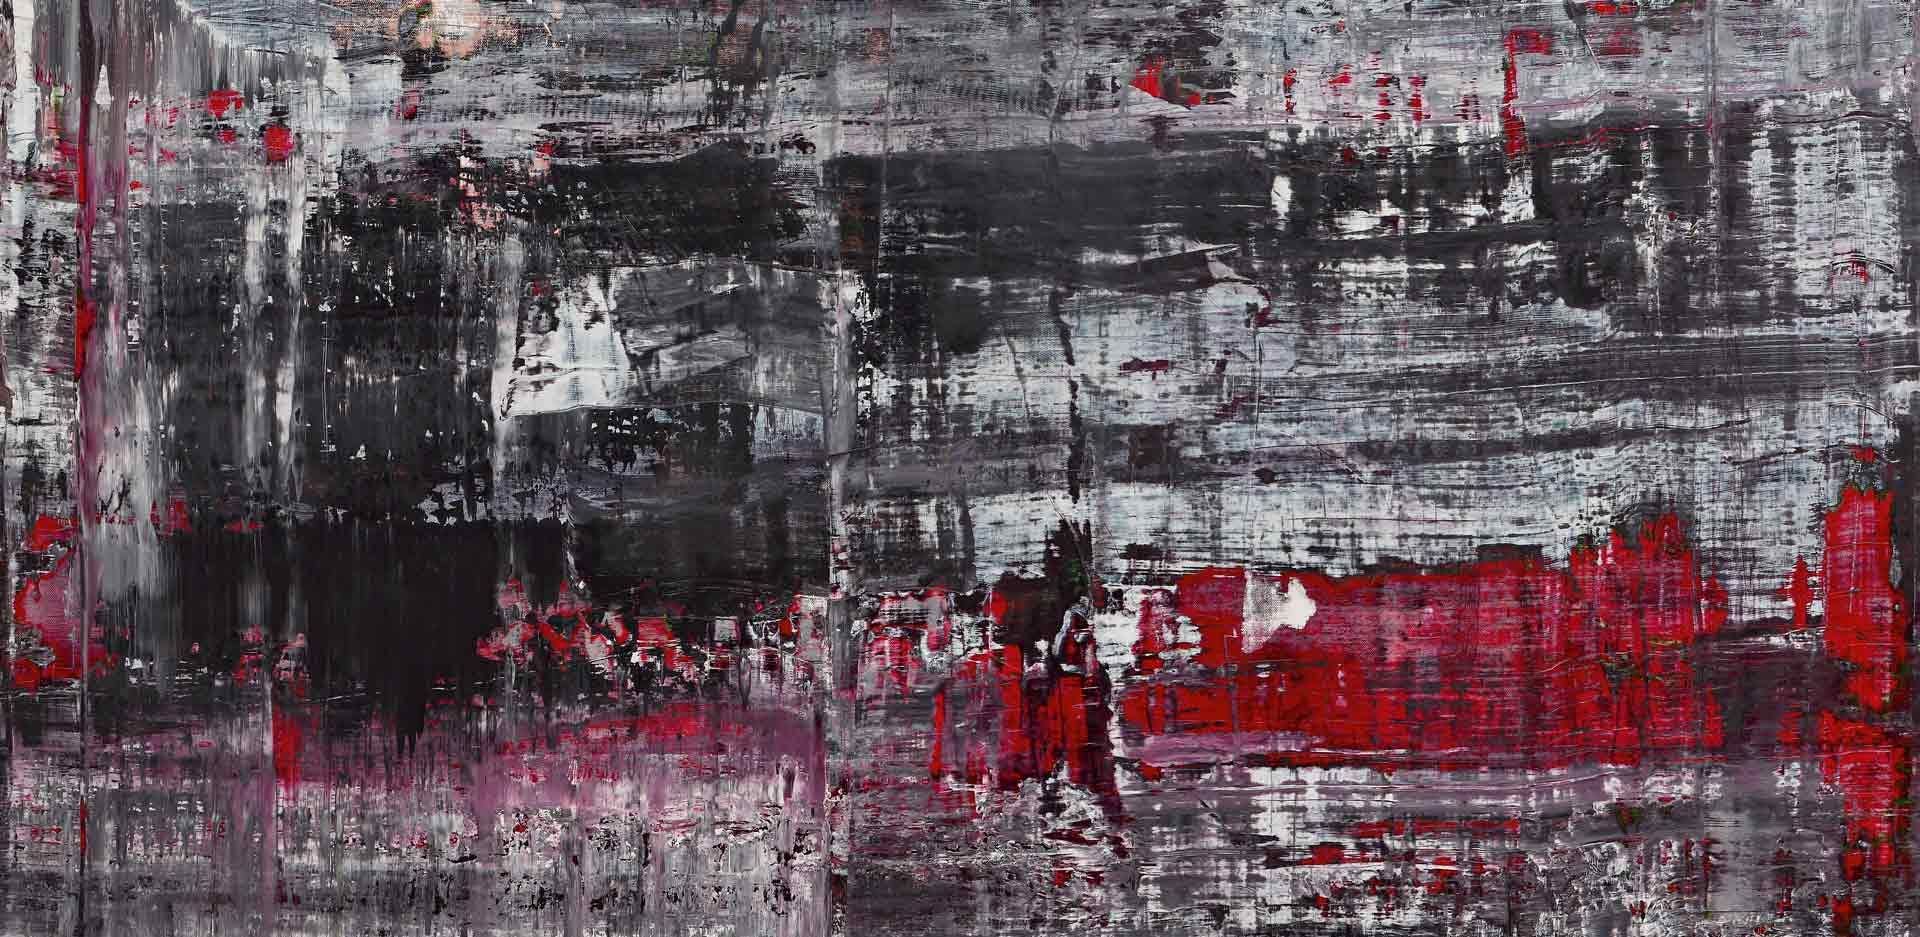 A detailed view of Gerhard Richter’s 2014 painting titled Birkenau